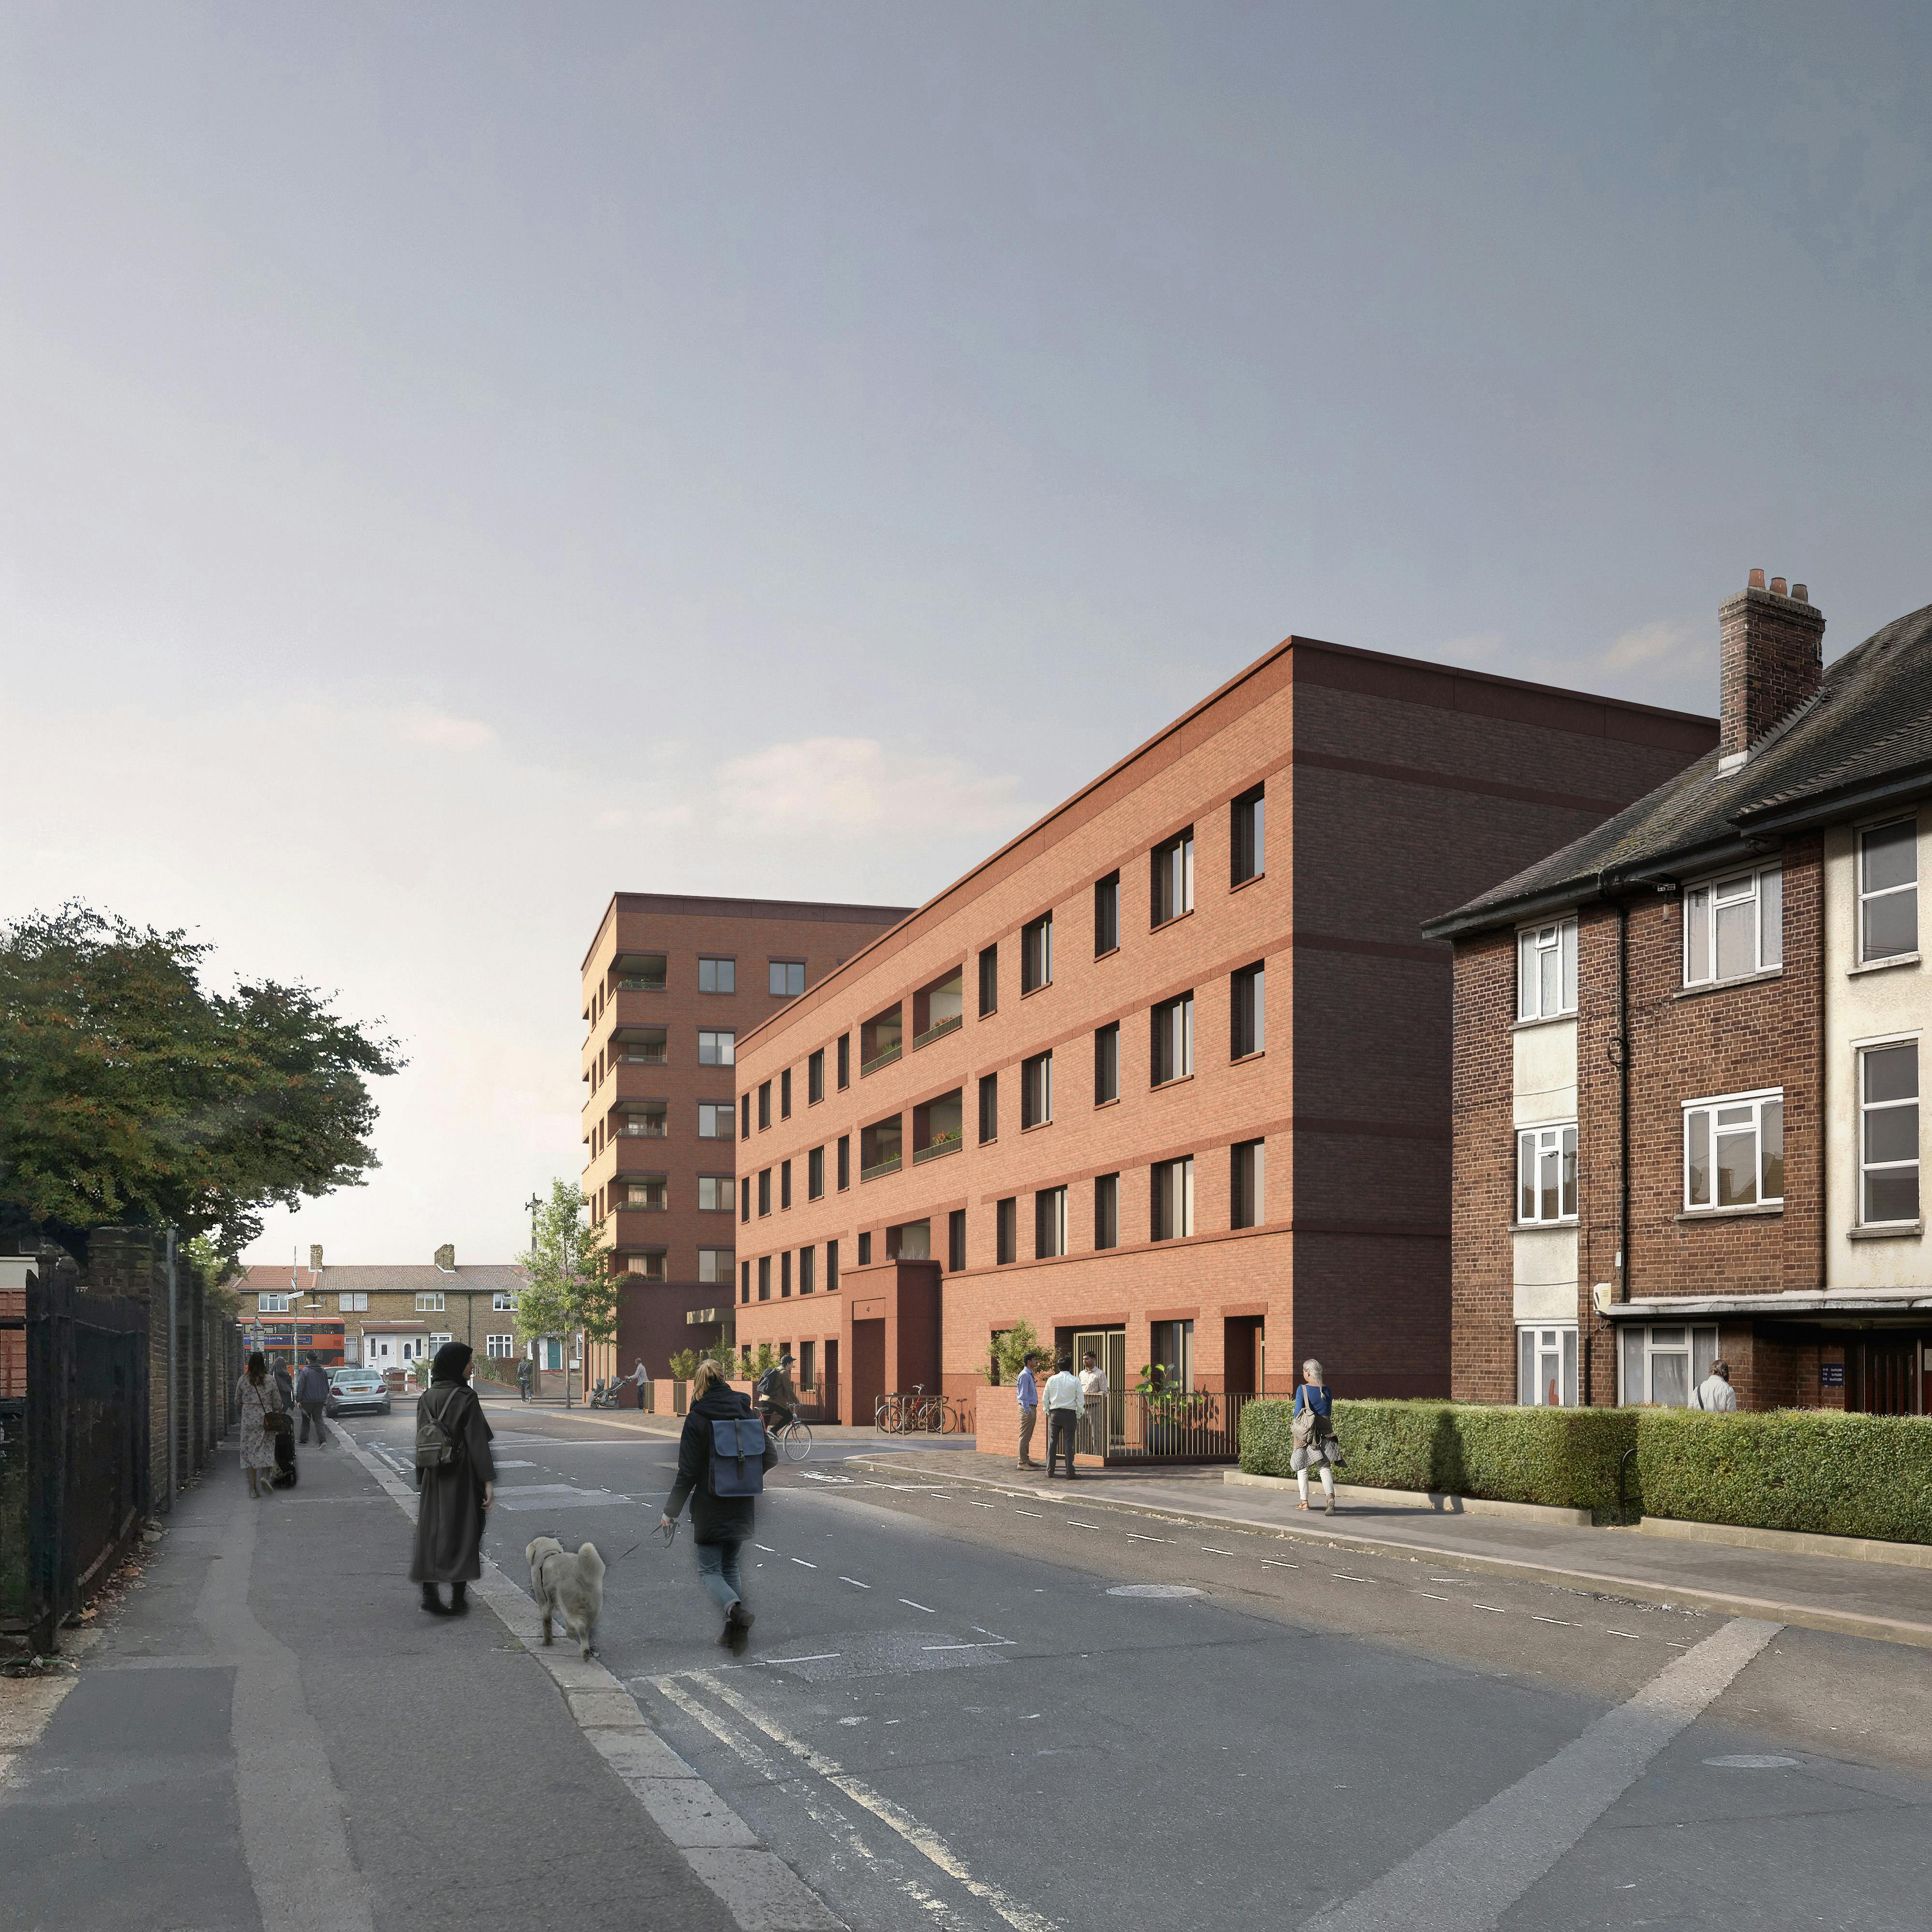 Artist's impression looking along Rectory Road